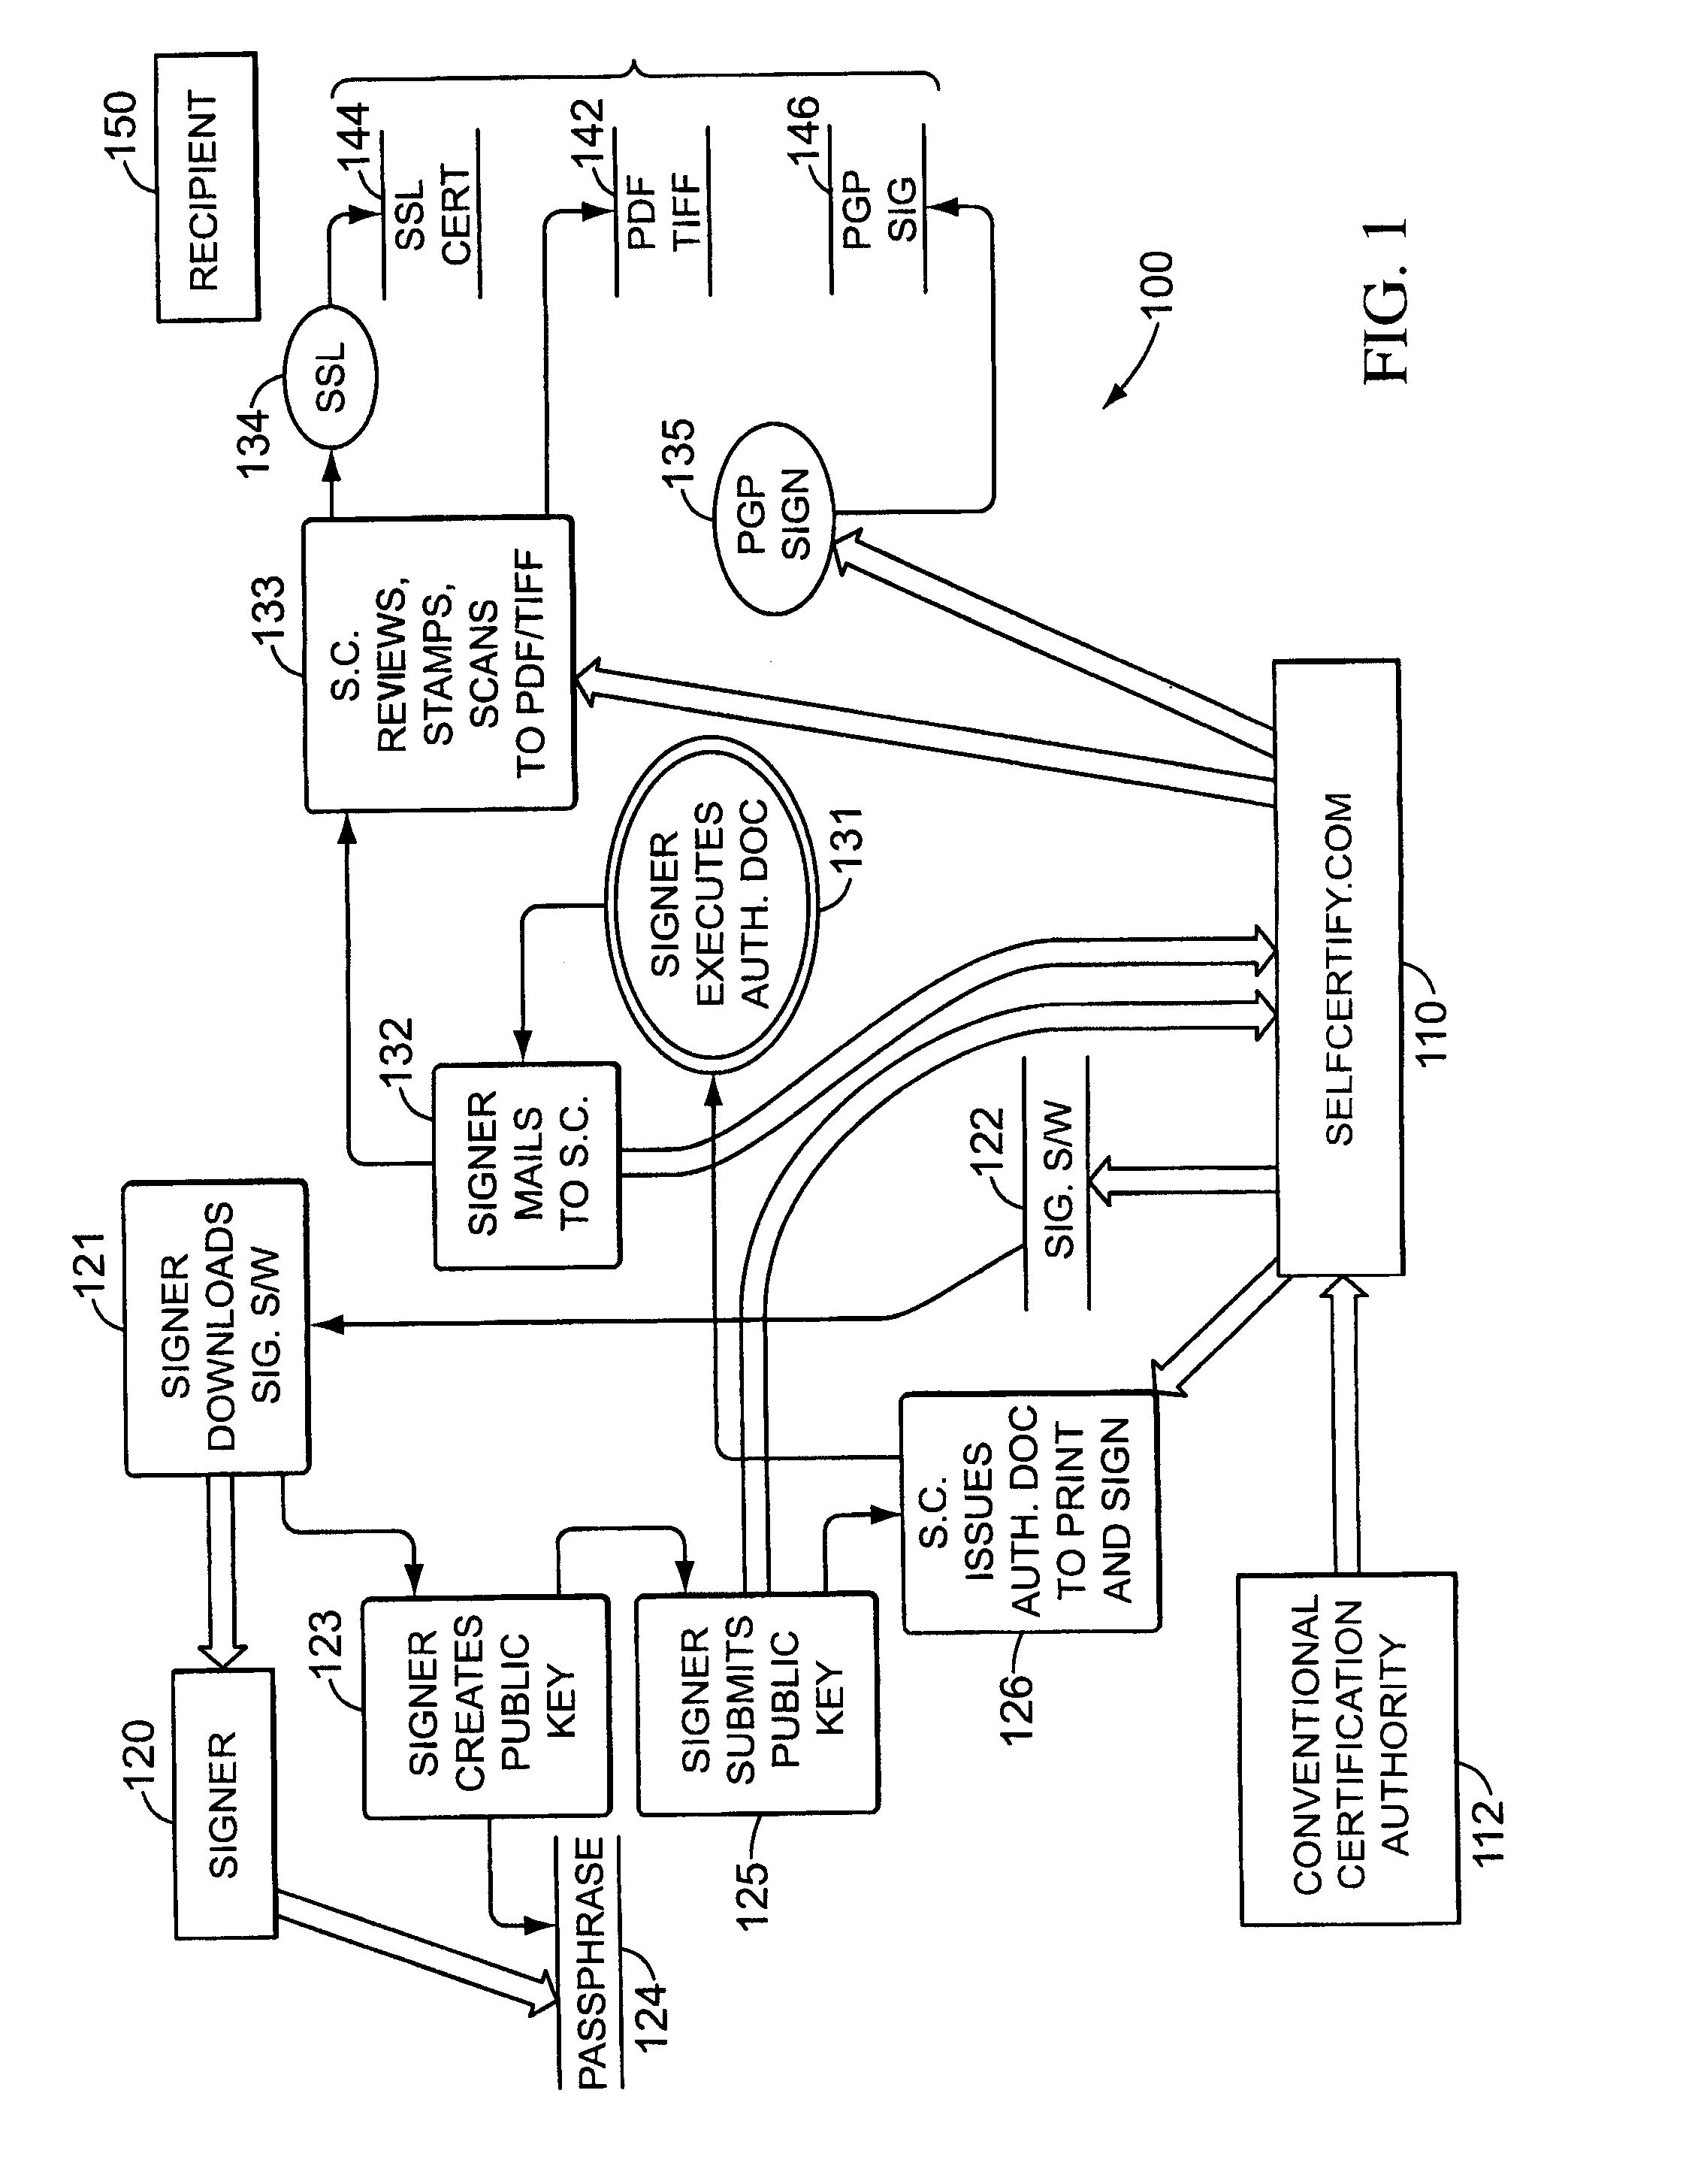 Encryption and authentication systems and methods